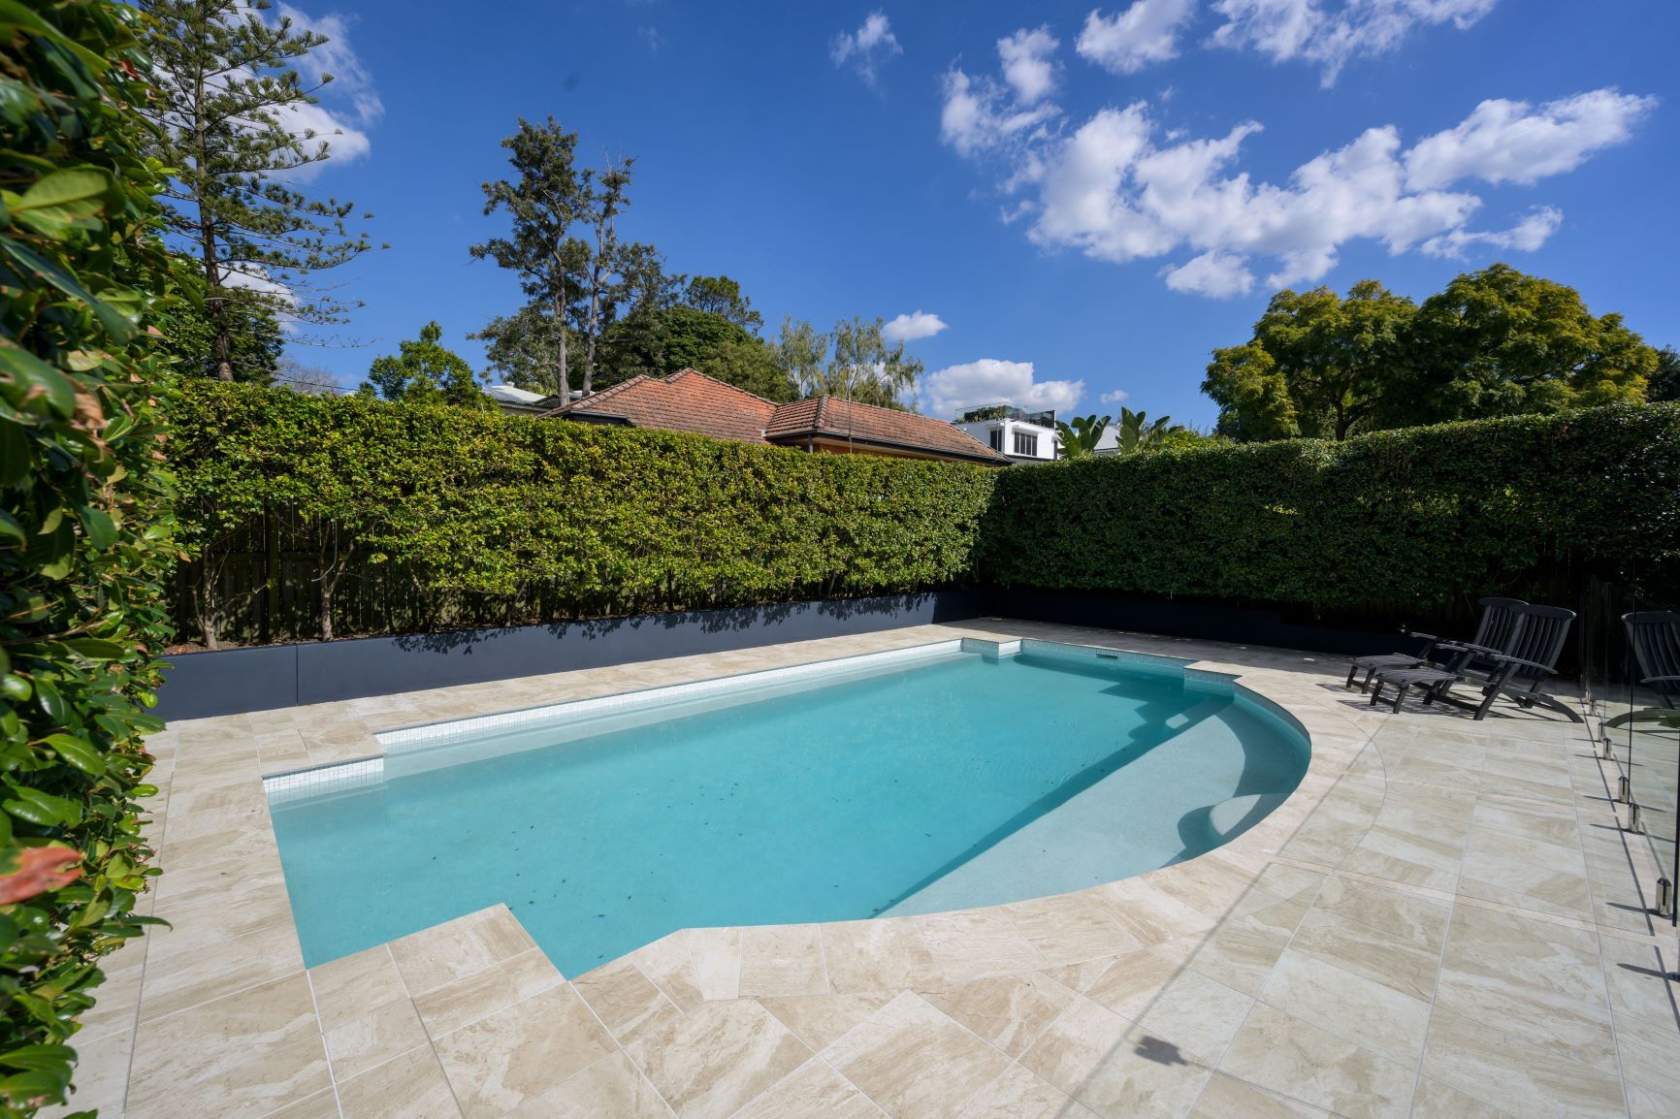 Latte Marblano Porcelain pool coping and surrounds with Urban White ceramic waterline tile4